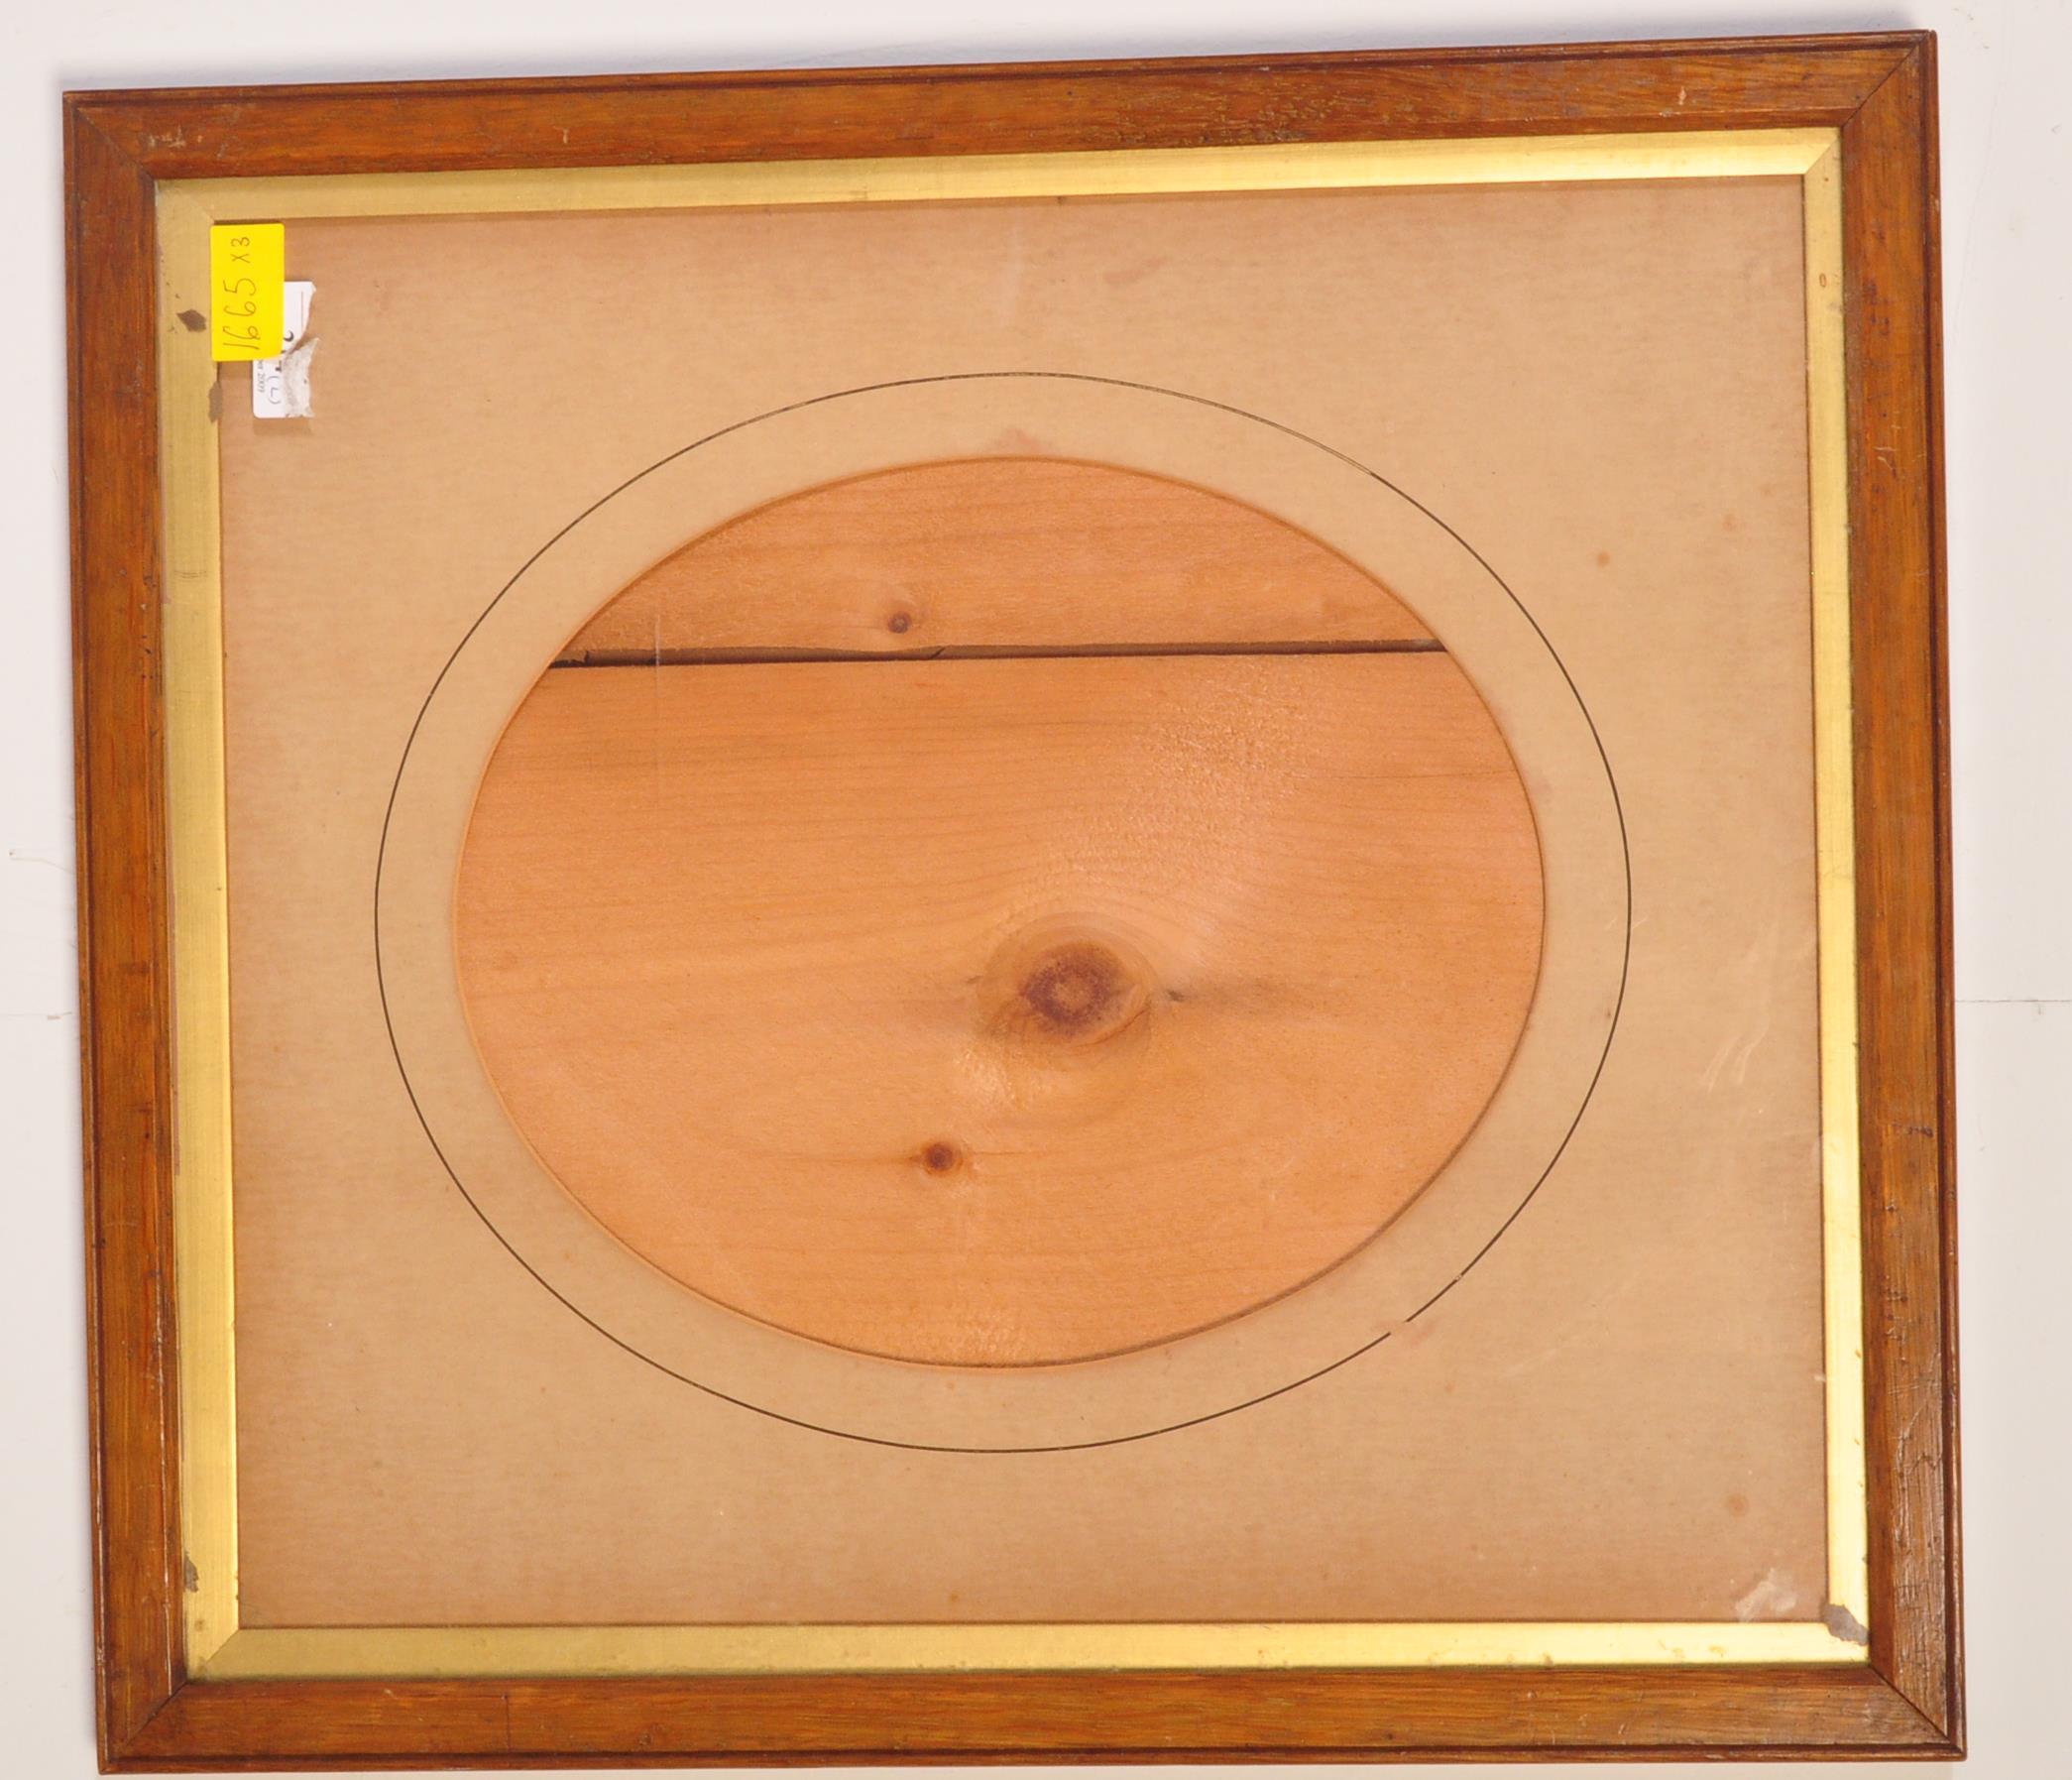 BURR WALNUT PAINTING FRAME WITH PAIR OF TONDO FRAMES - Image 4 of 8